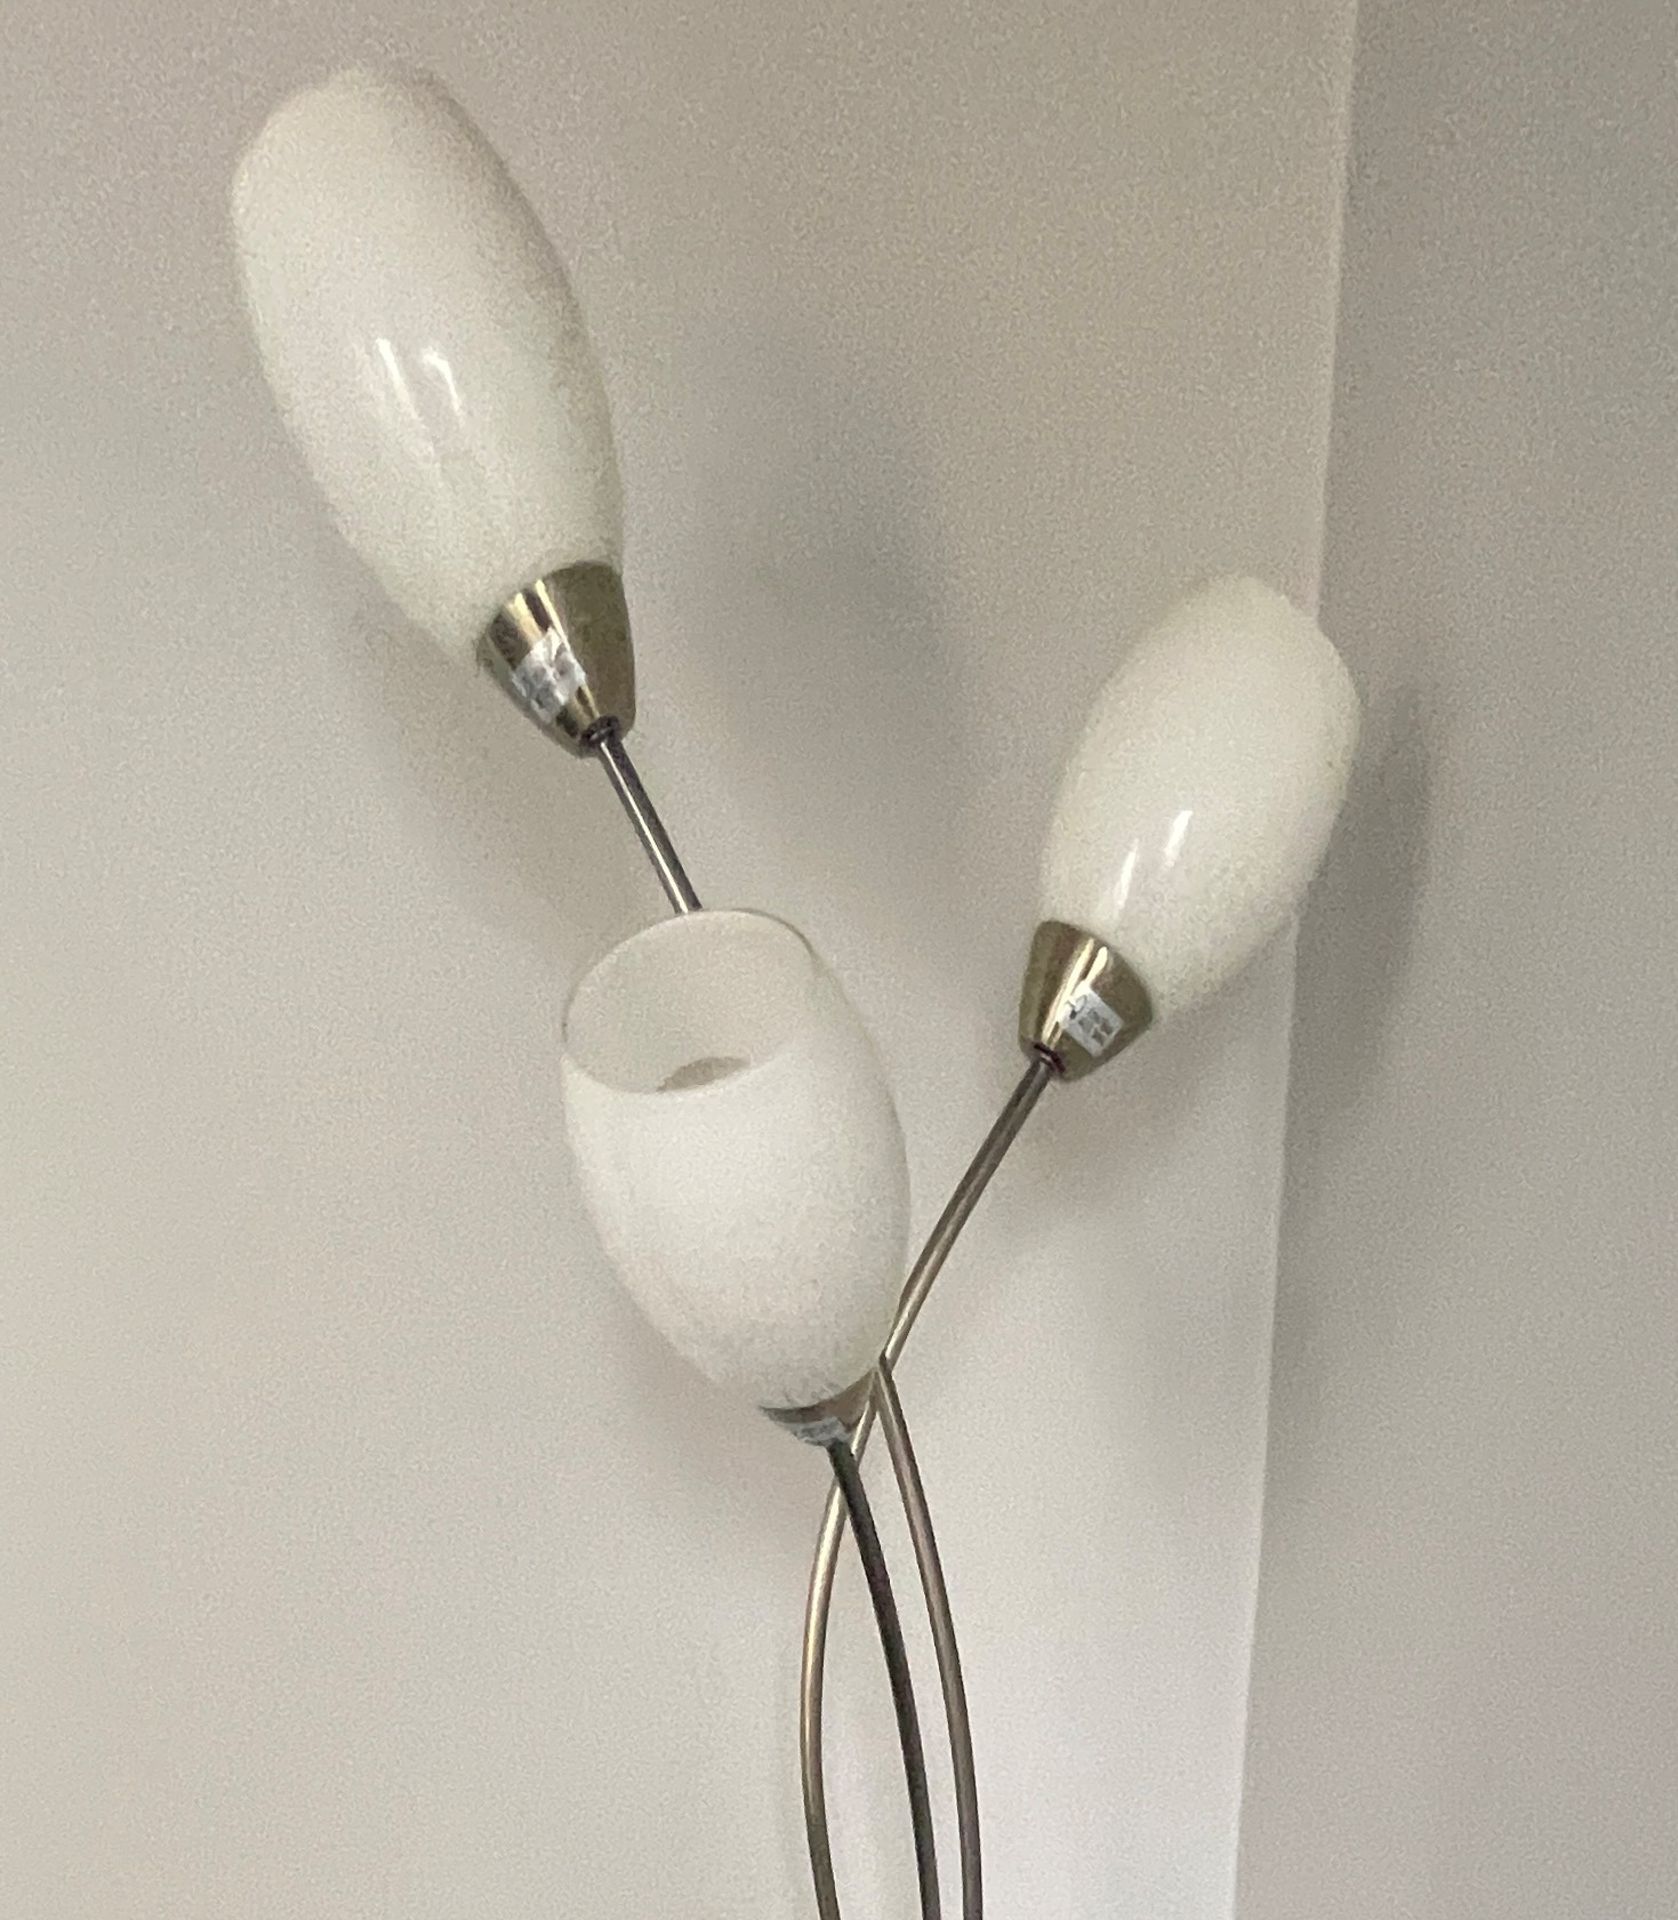 1 x Brushed Chrome Floor Lamp With Three Lights and White Glass Shades - Dimensions: H154 cms - Image 3 of 3